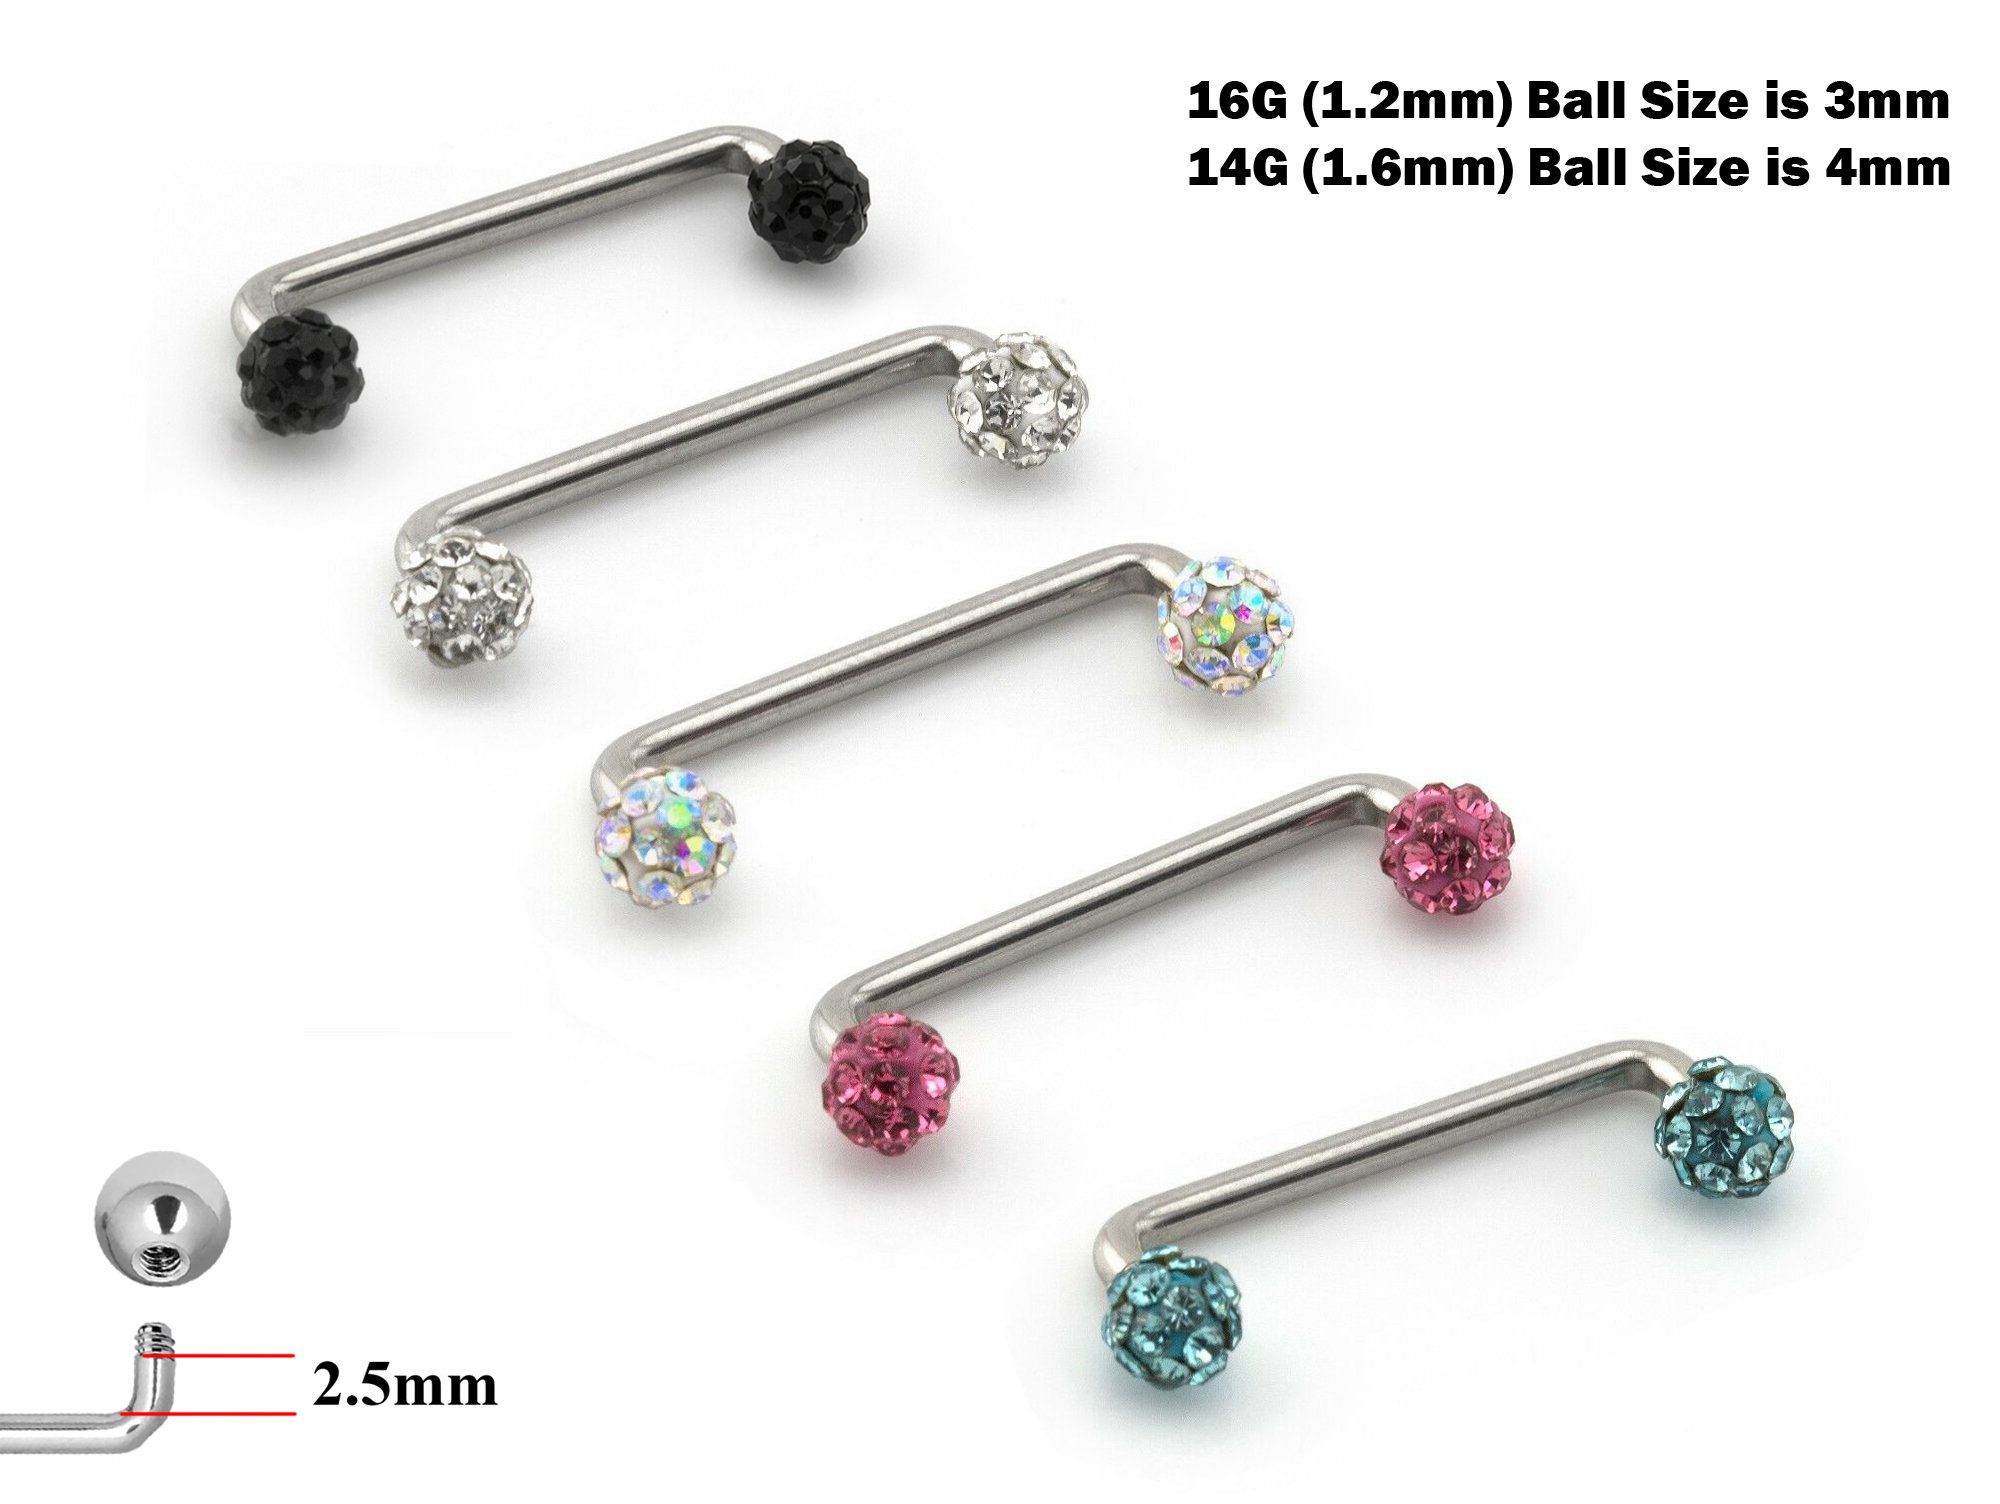 Buyer's Guide to Ball Stretching Rings - Body Jewelry & Piercing Blog